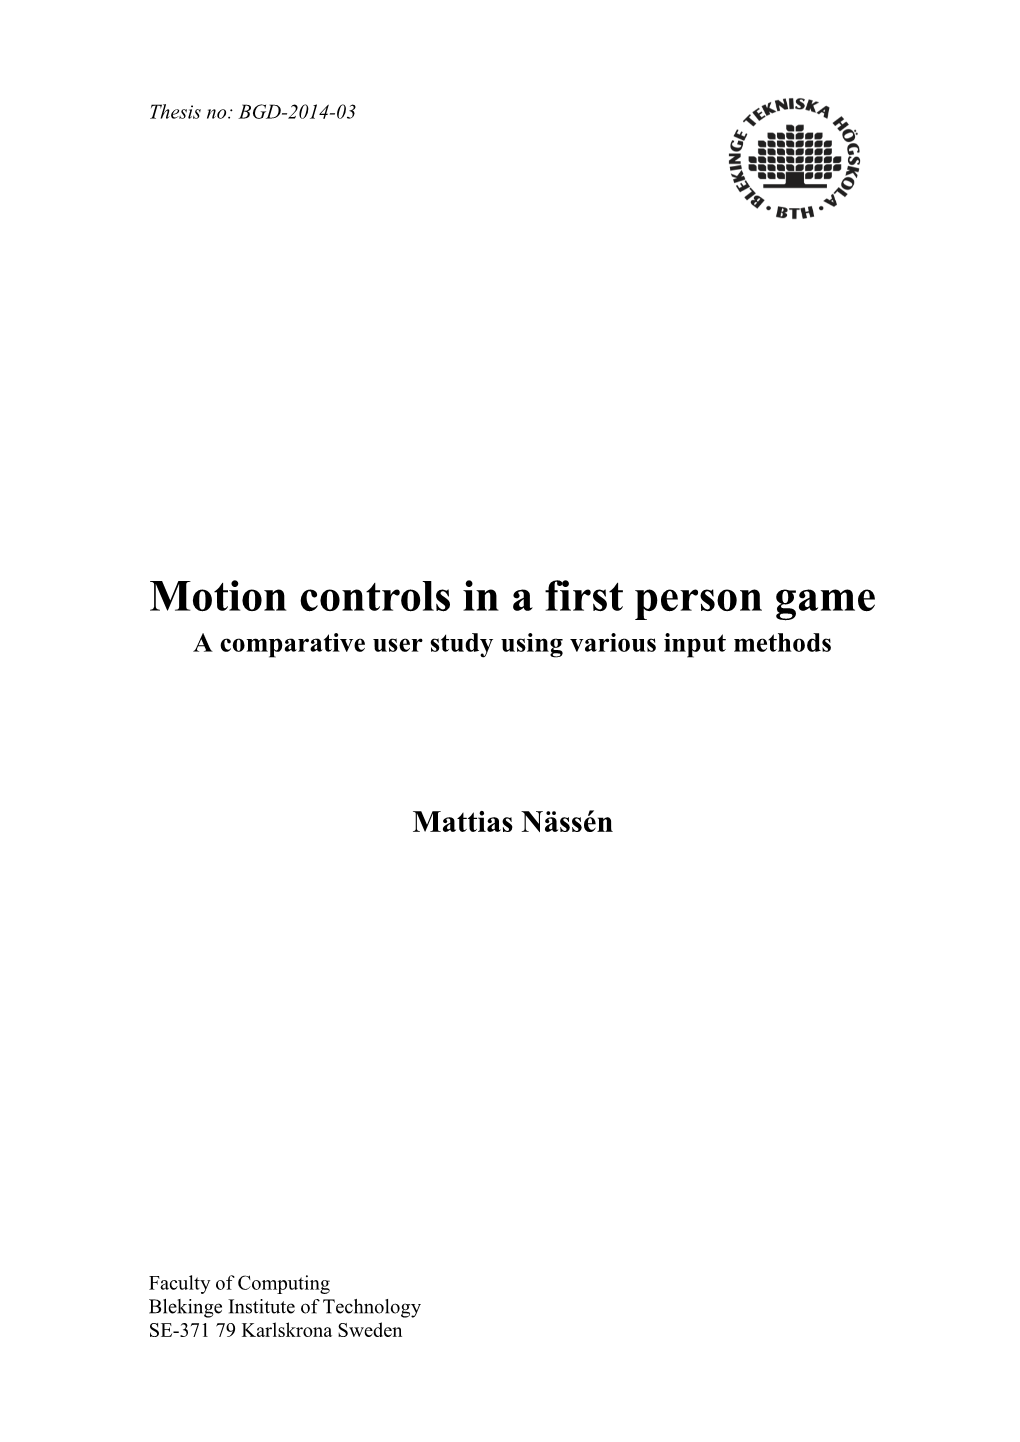 Motion Controls in a First Person Game a Comparative User Study Using Various Input Methods